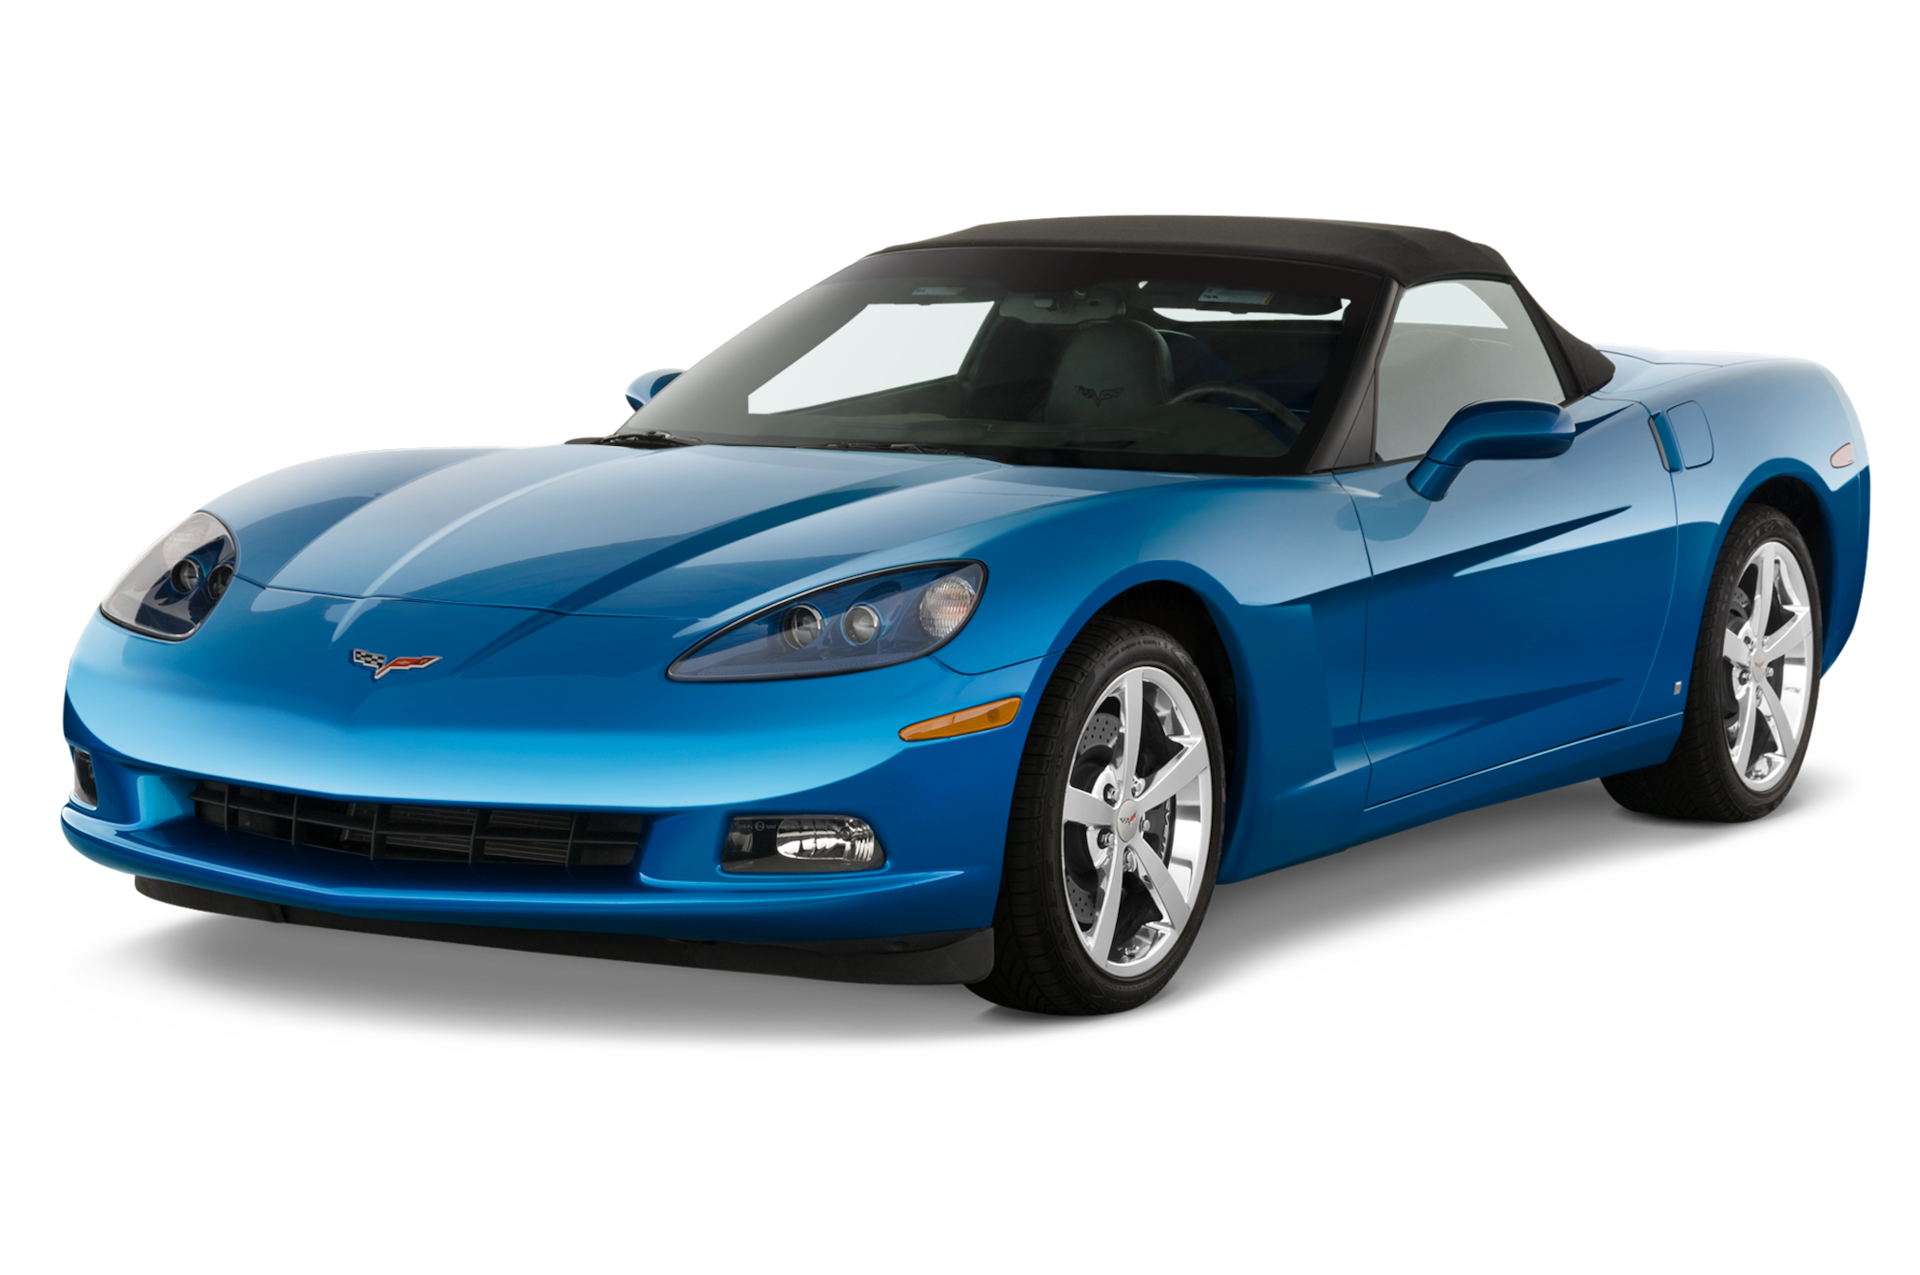 2011 Chevrolet Corvette Prices, Reviews, and Photos - MotorTrend